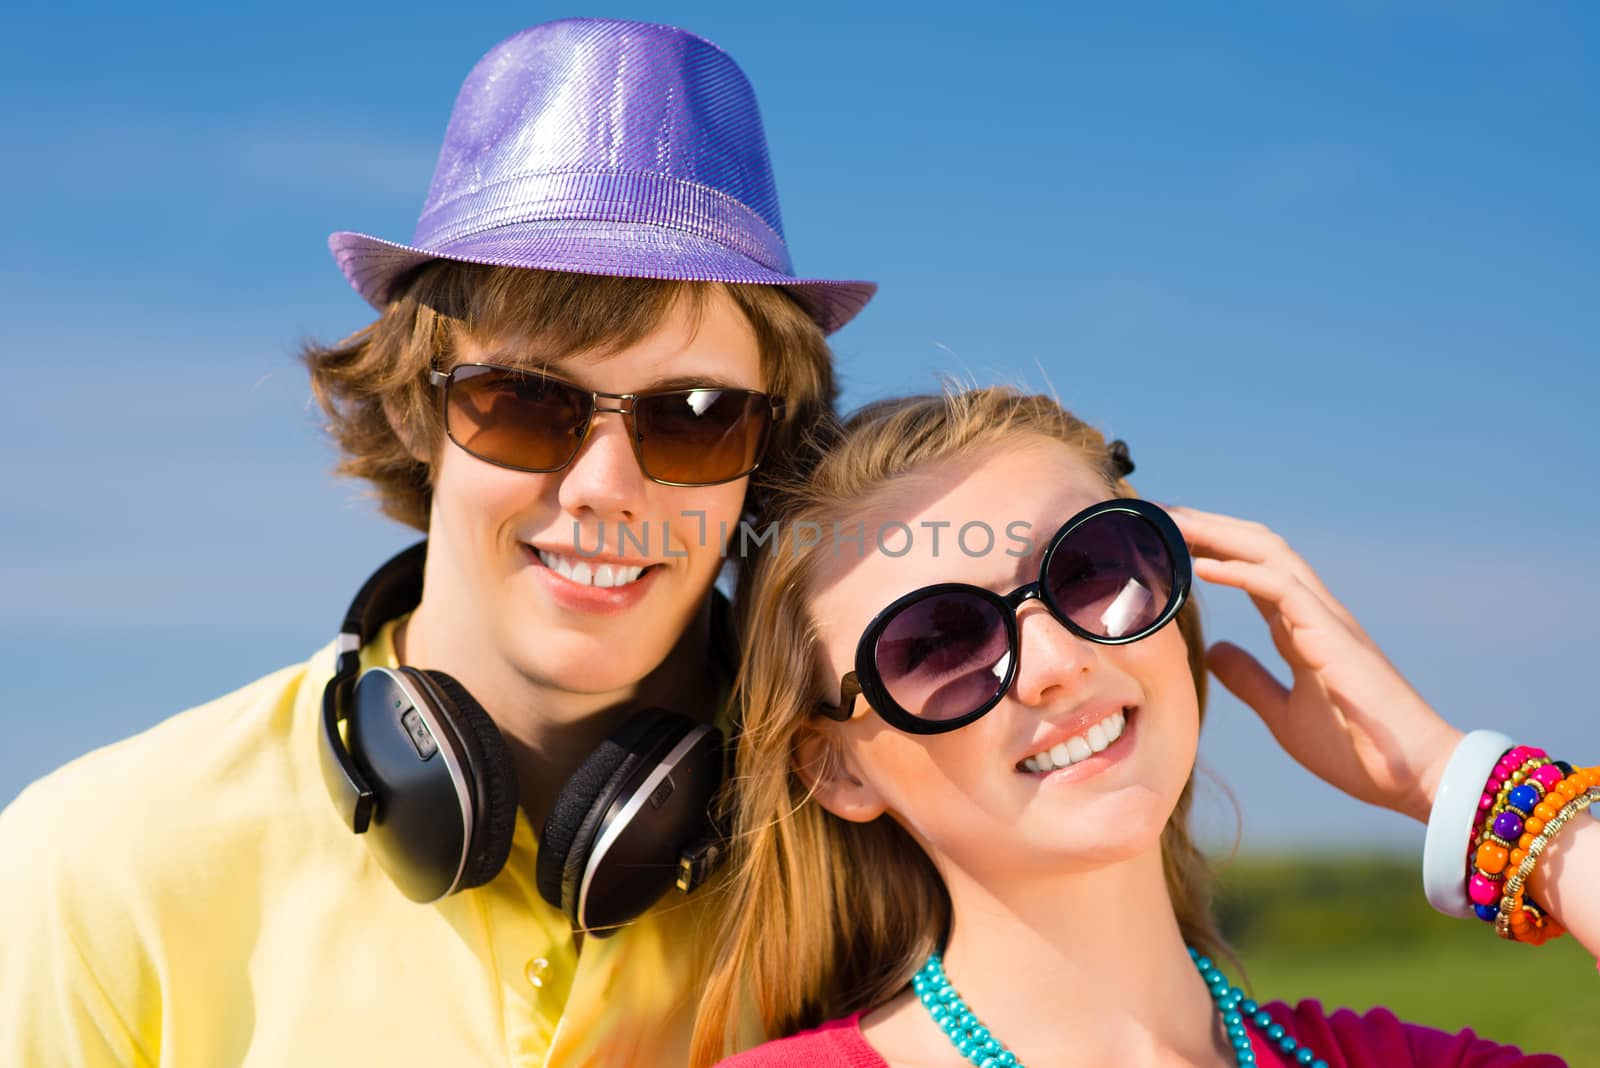 young couple standing on the road, having fun with friends